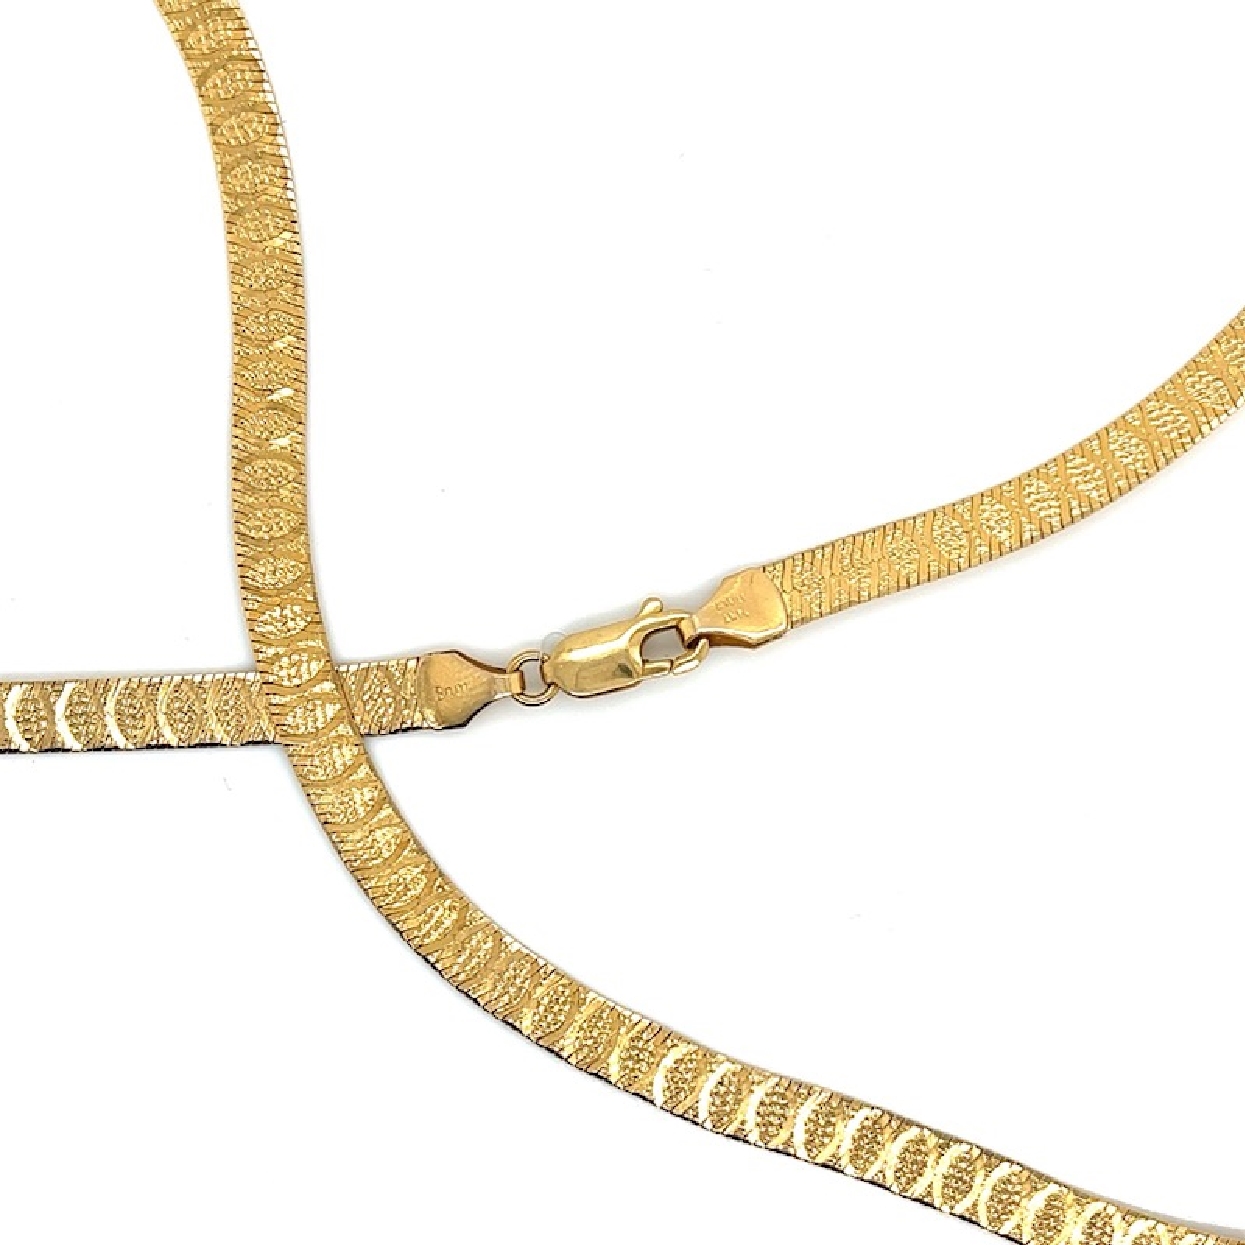 14K Yellow Gold Reversable Herringbone Chain with Shiny and Patterned Design Sides 24 Inches 